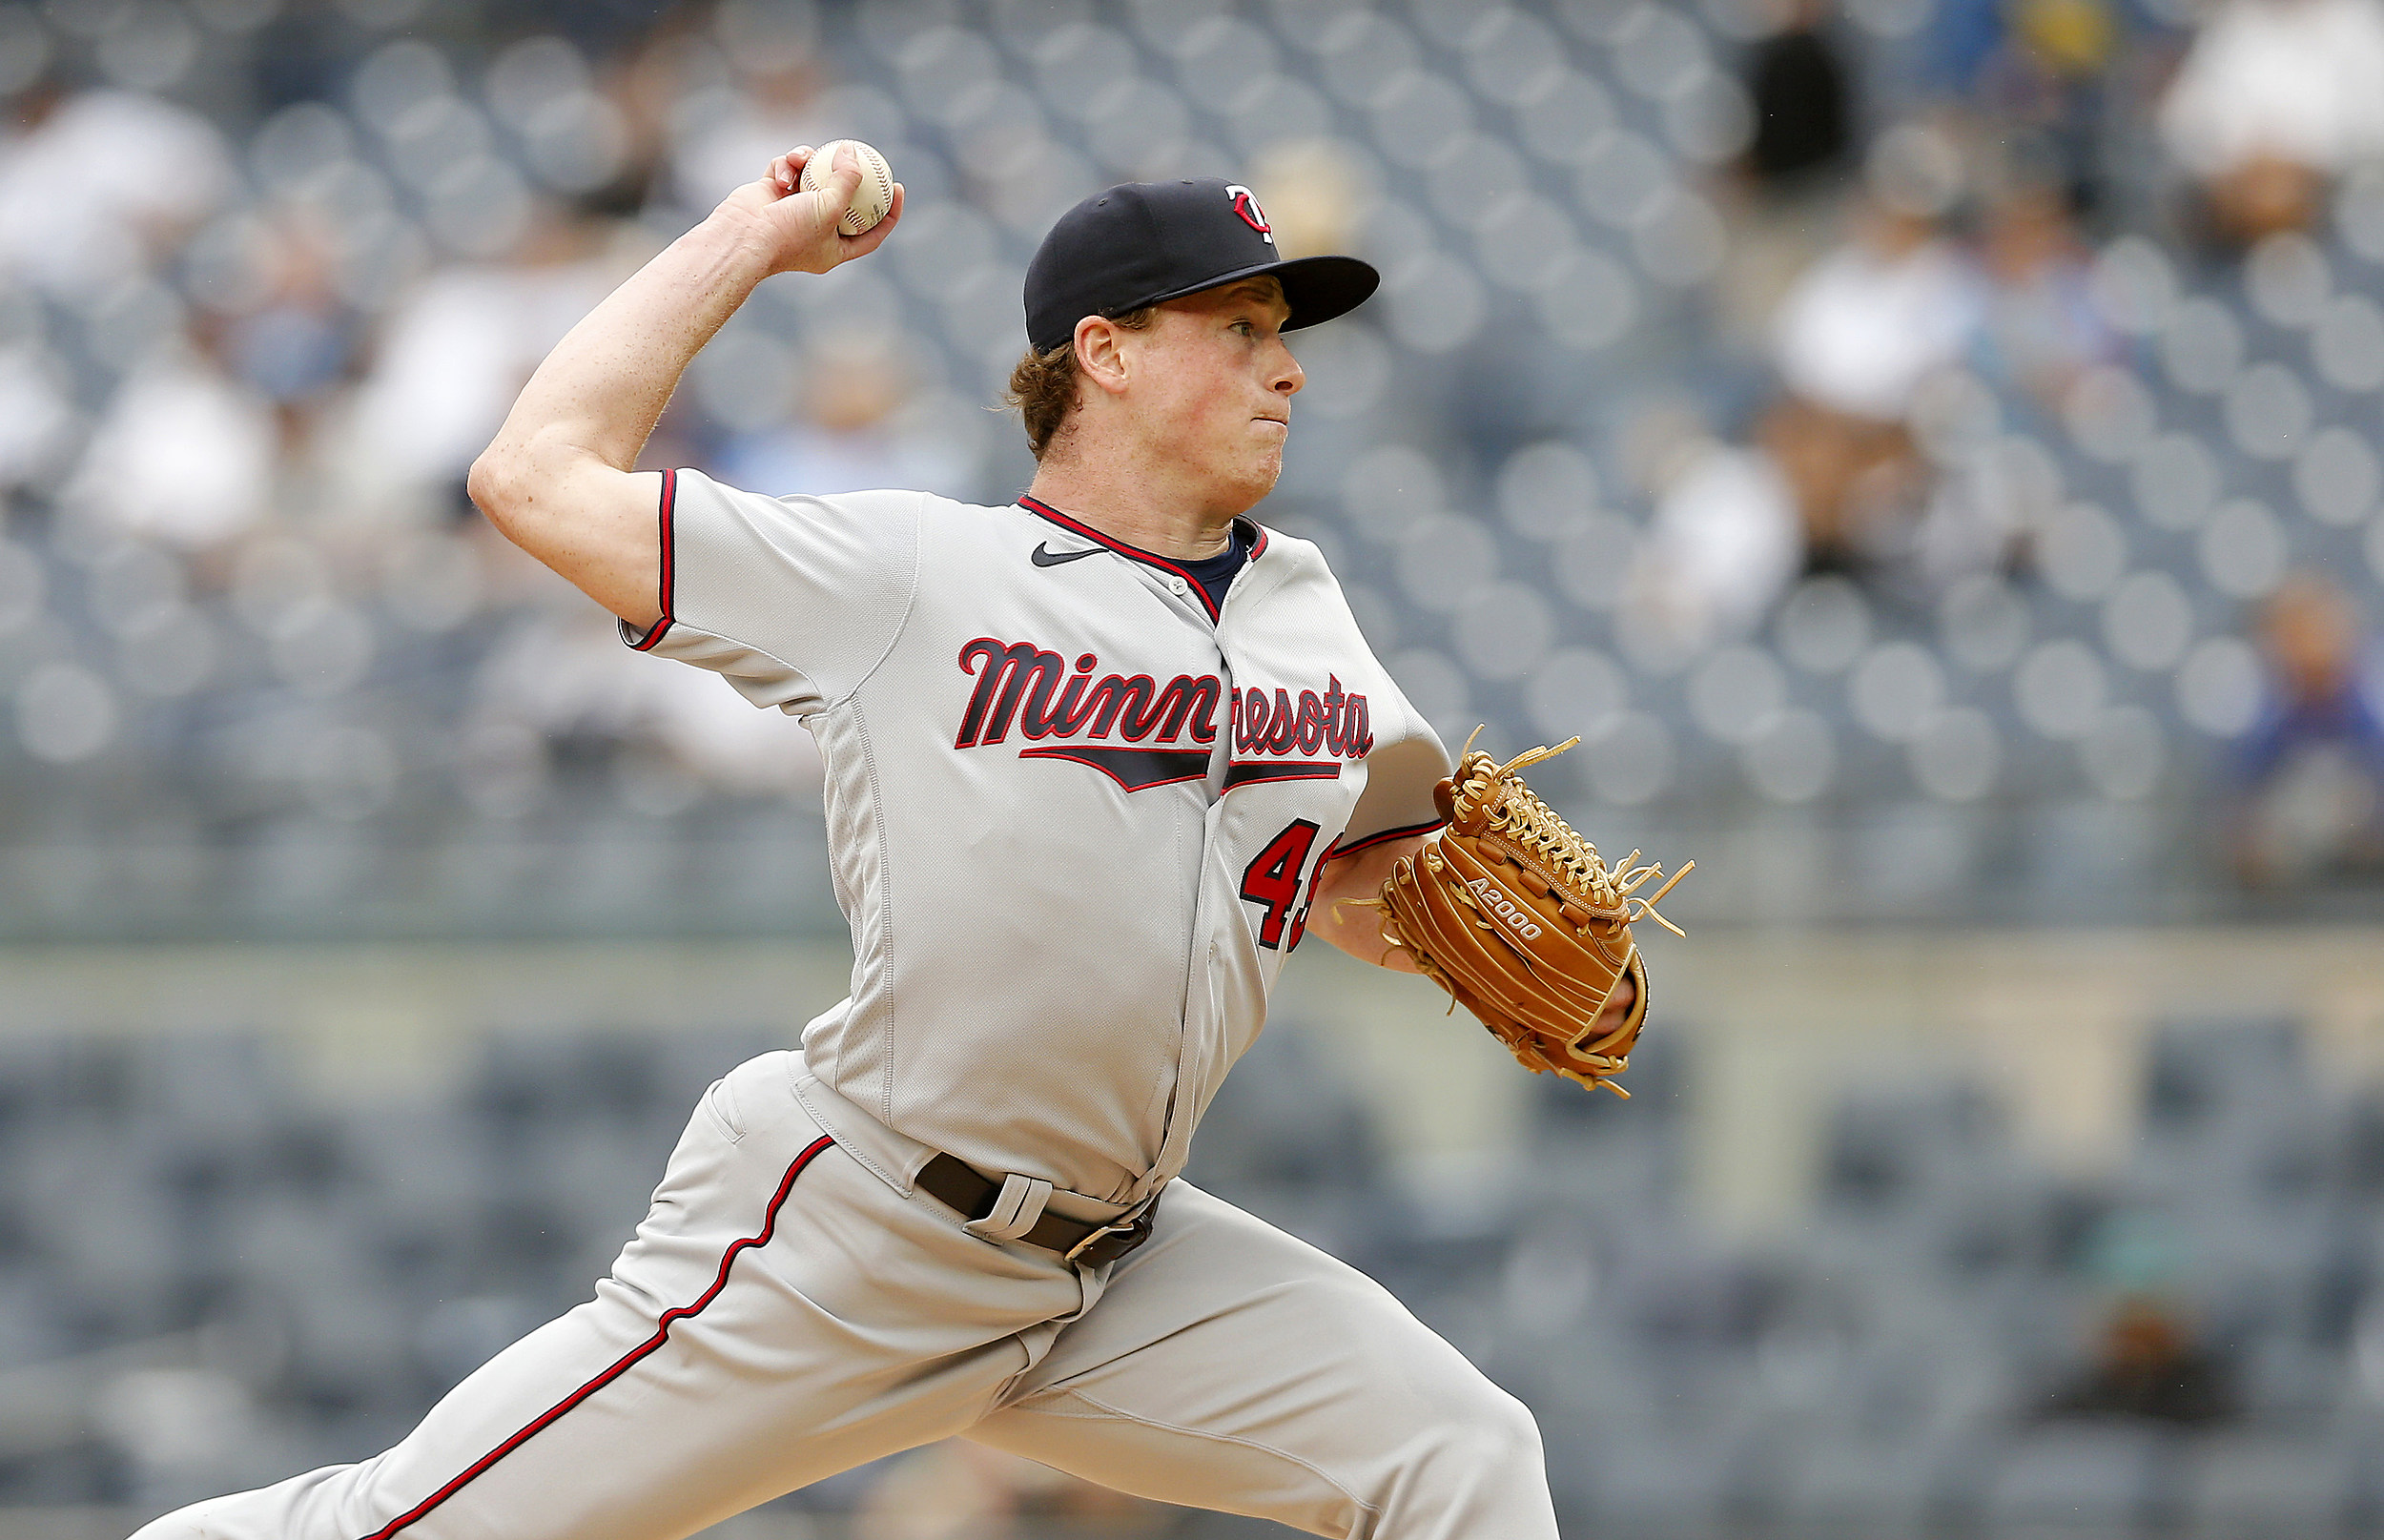 The Minnesota Twins face the Tampa Bay Rays Tuesday night